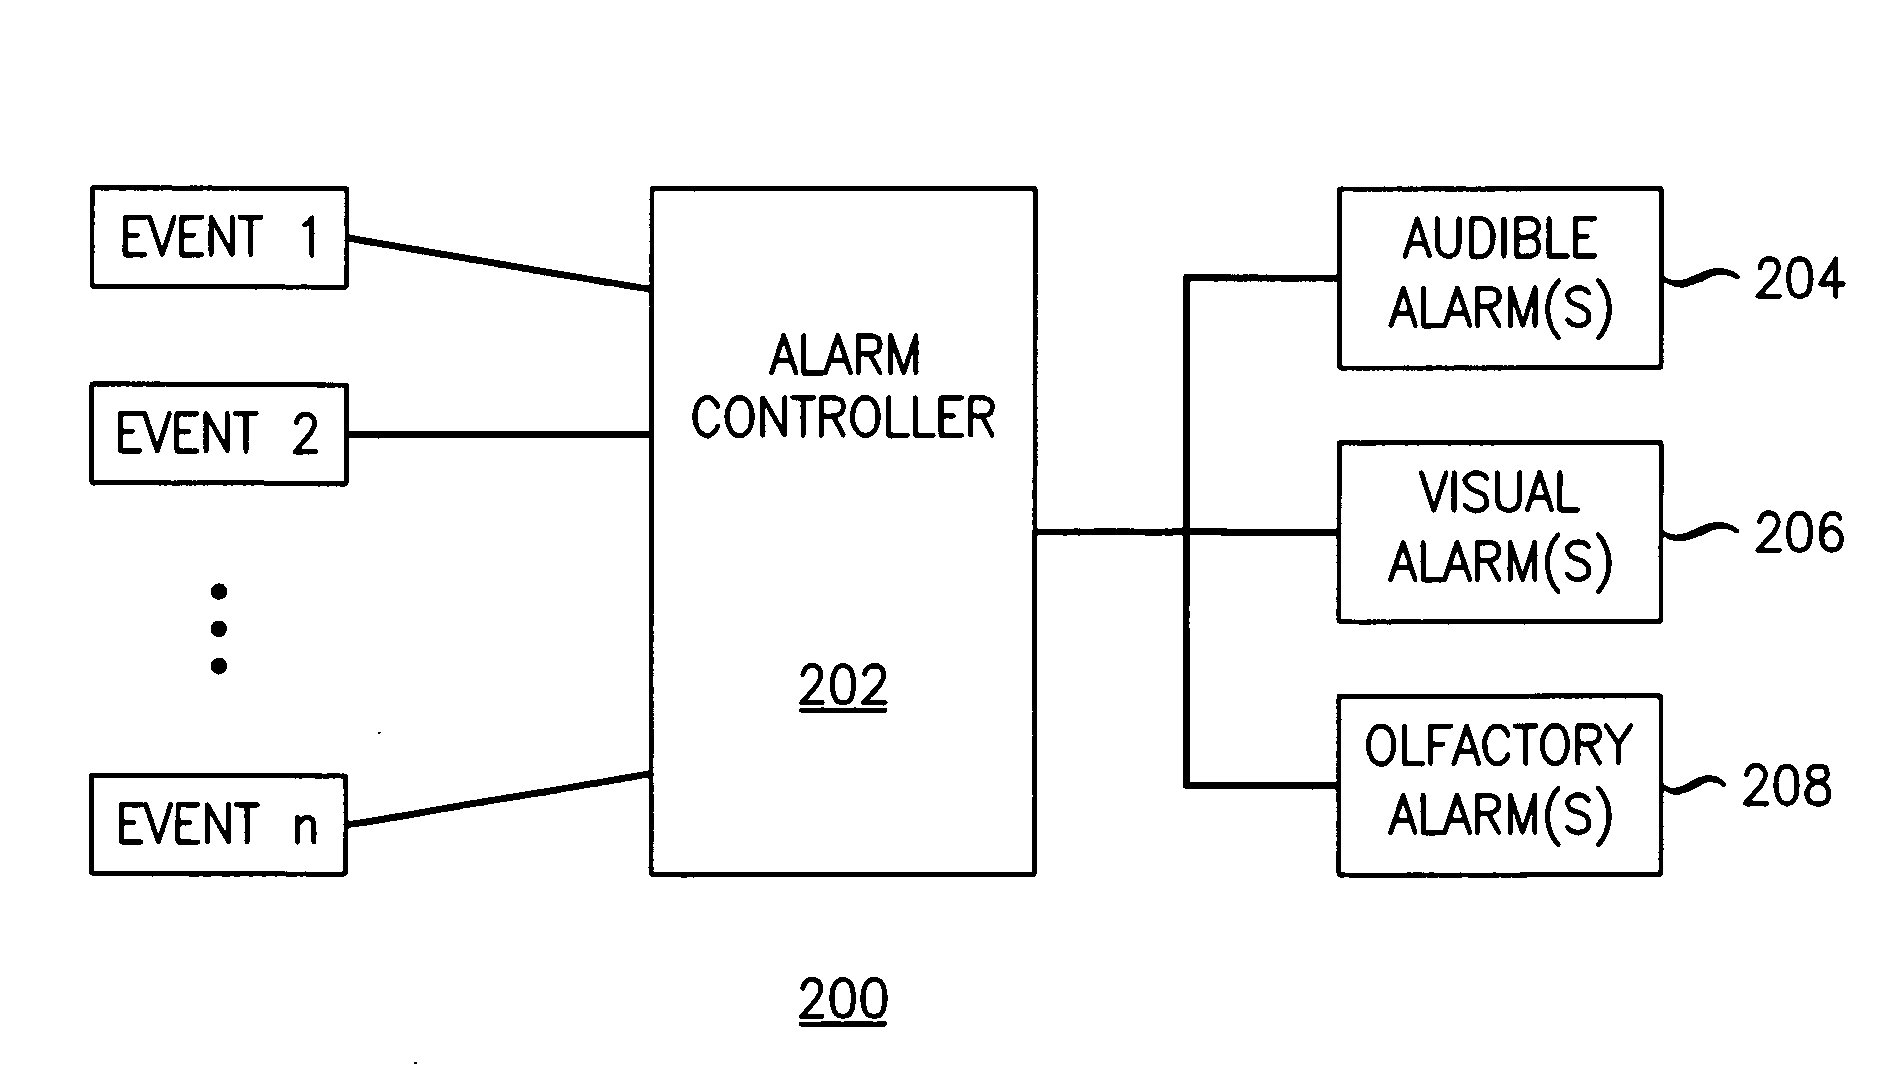 Alarm scheme with olfactory alerting component